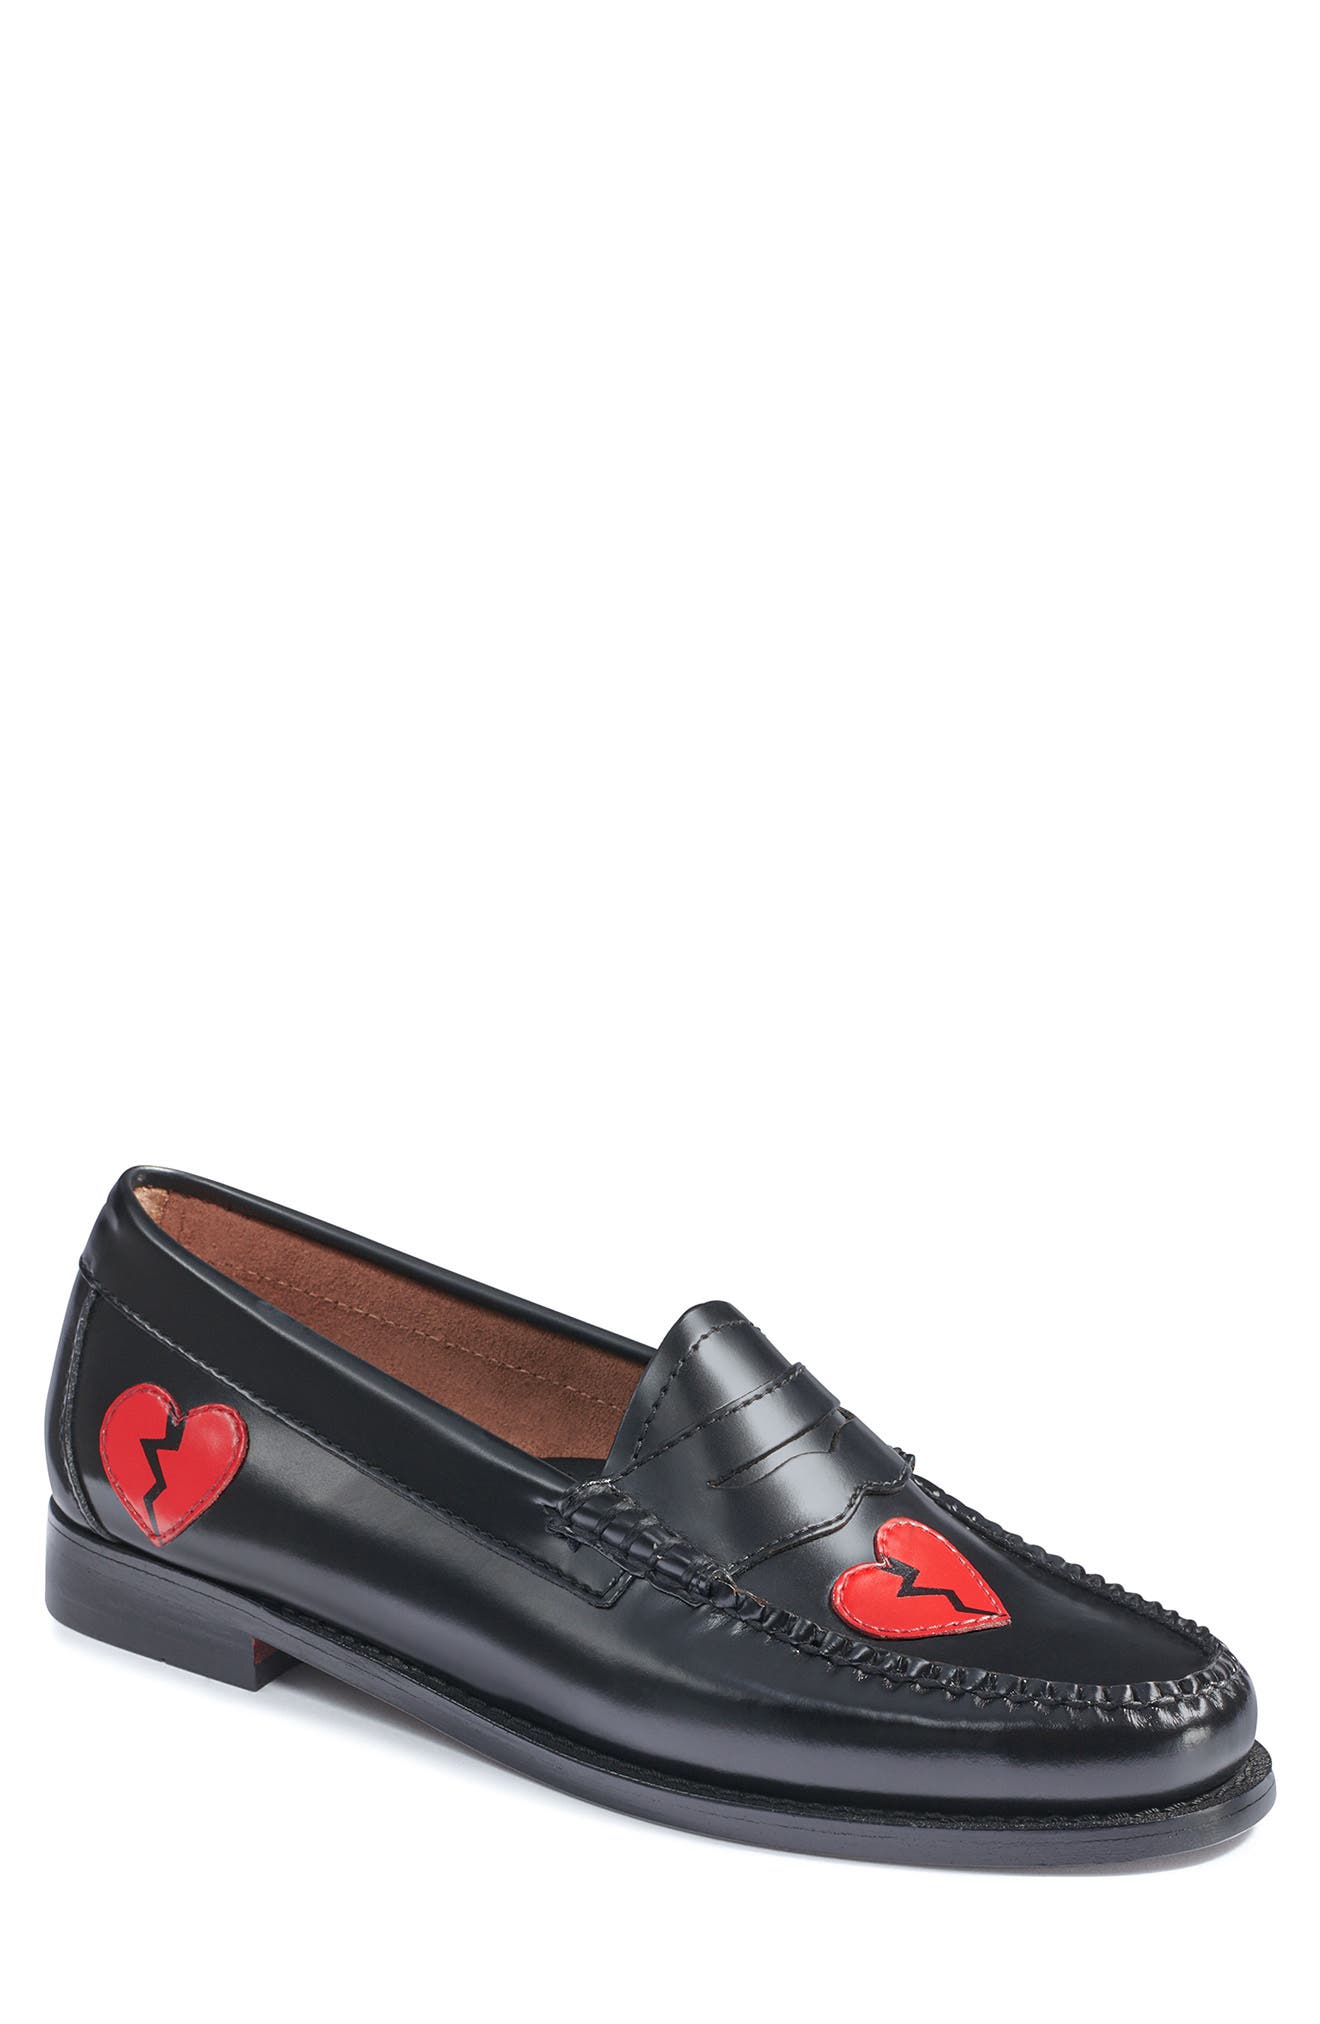 G.H. Bass Originals G.H. Bass & Co. Whitney Love Leather Loafer in Black Leather at Nordstrom